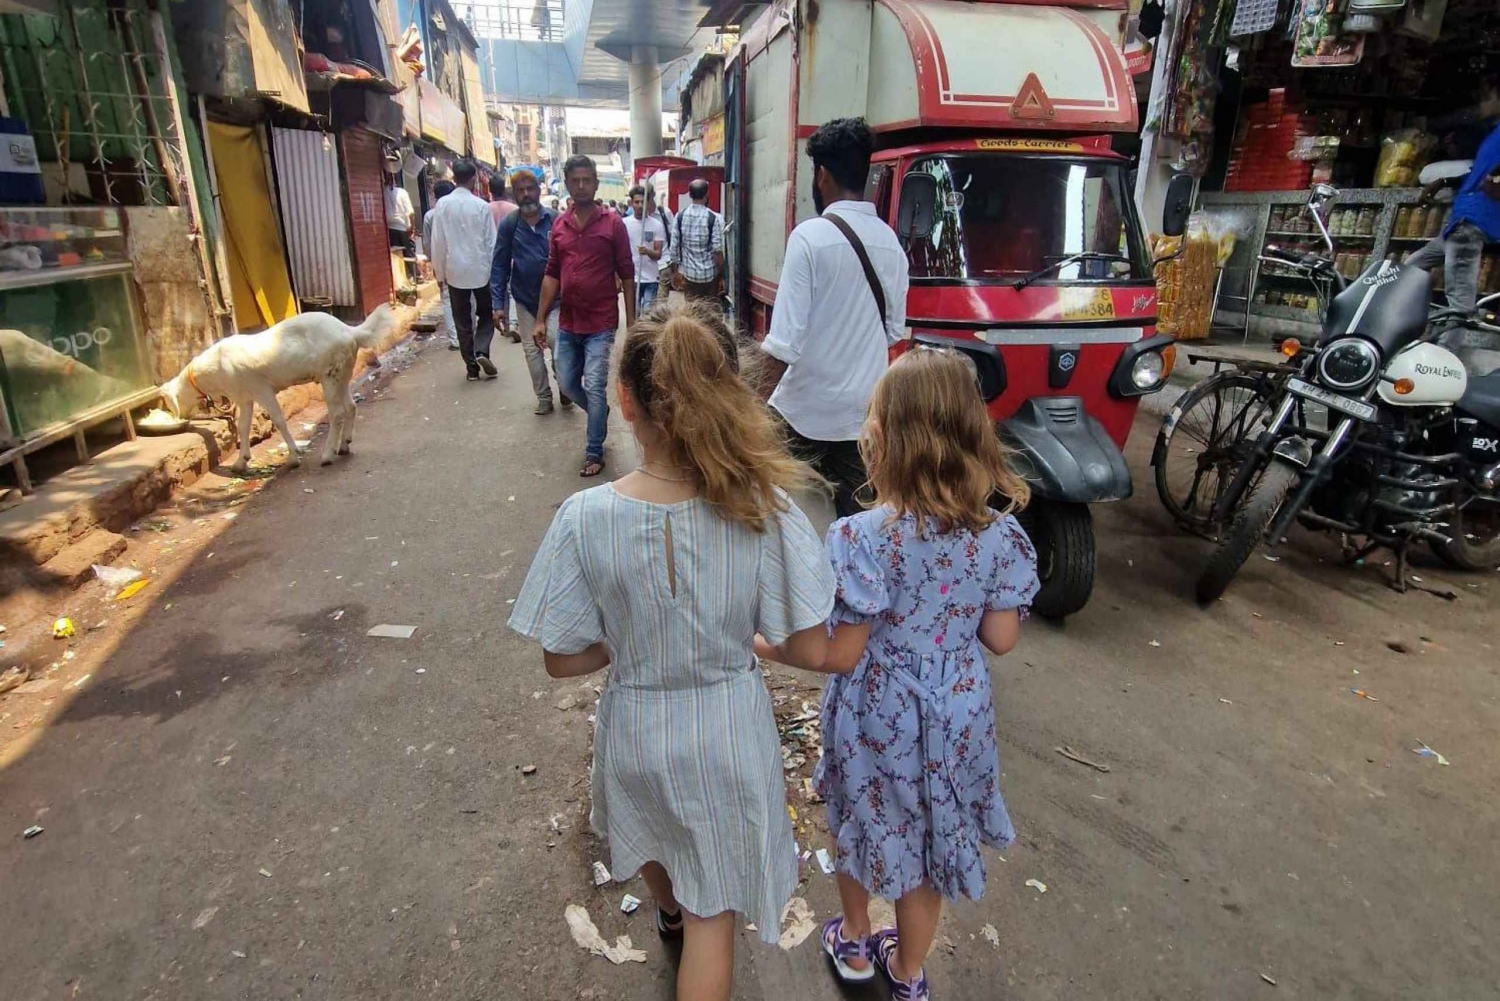 Mumbai Dharavi: Private Slum Tour with Lunch & Pottery class